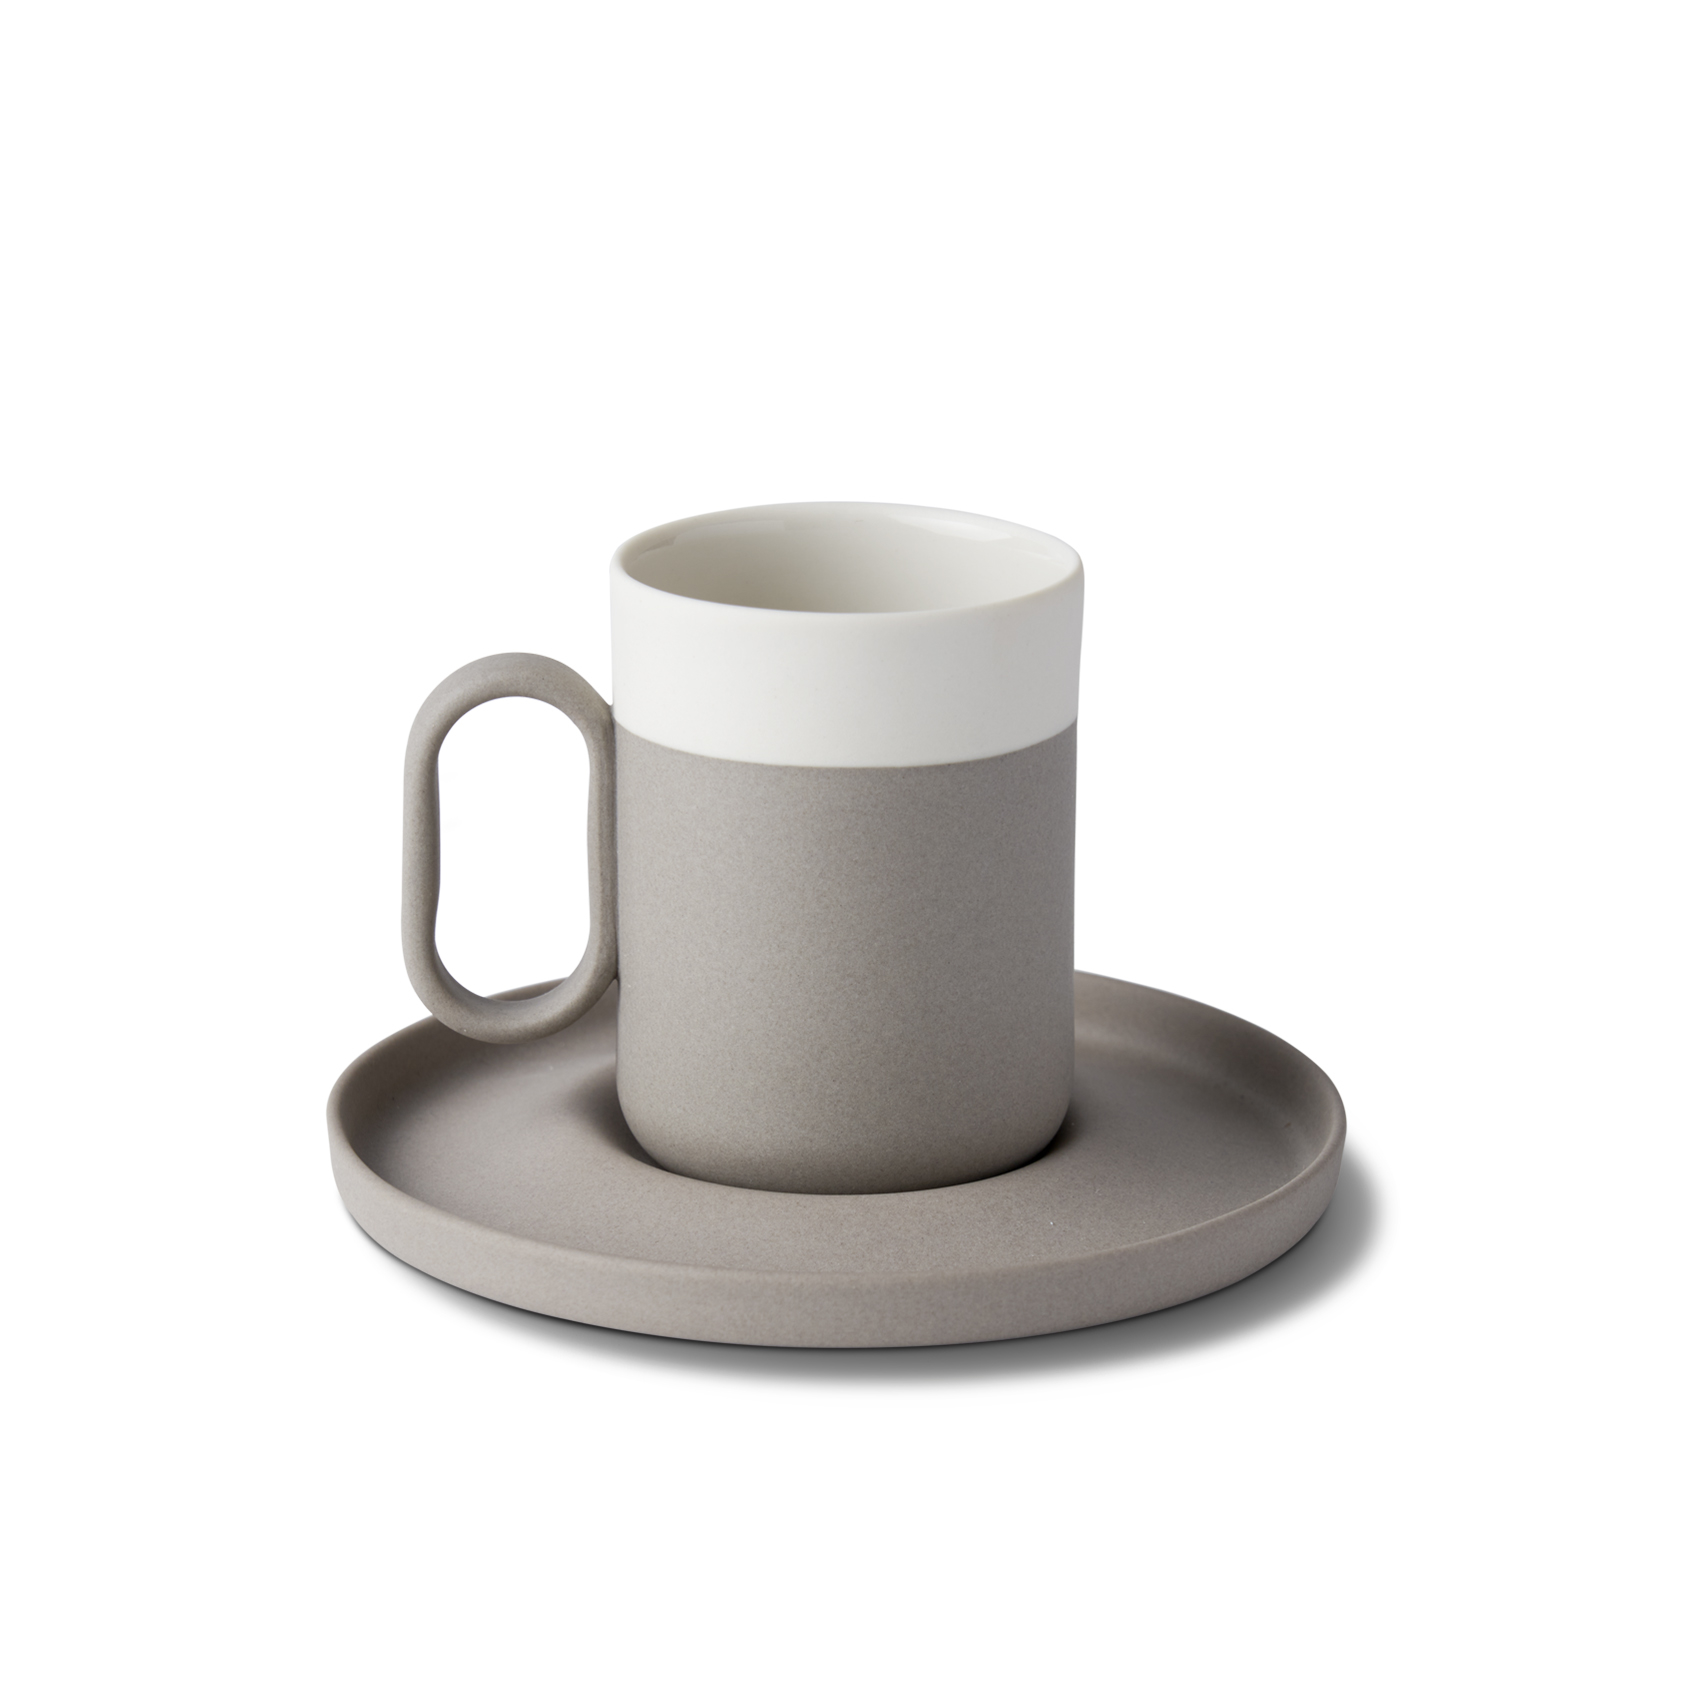 Capsule Espresso Cup with Saucer - Capsule Collection